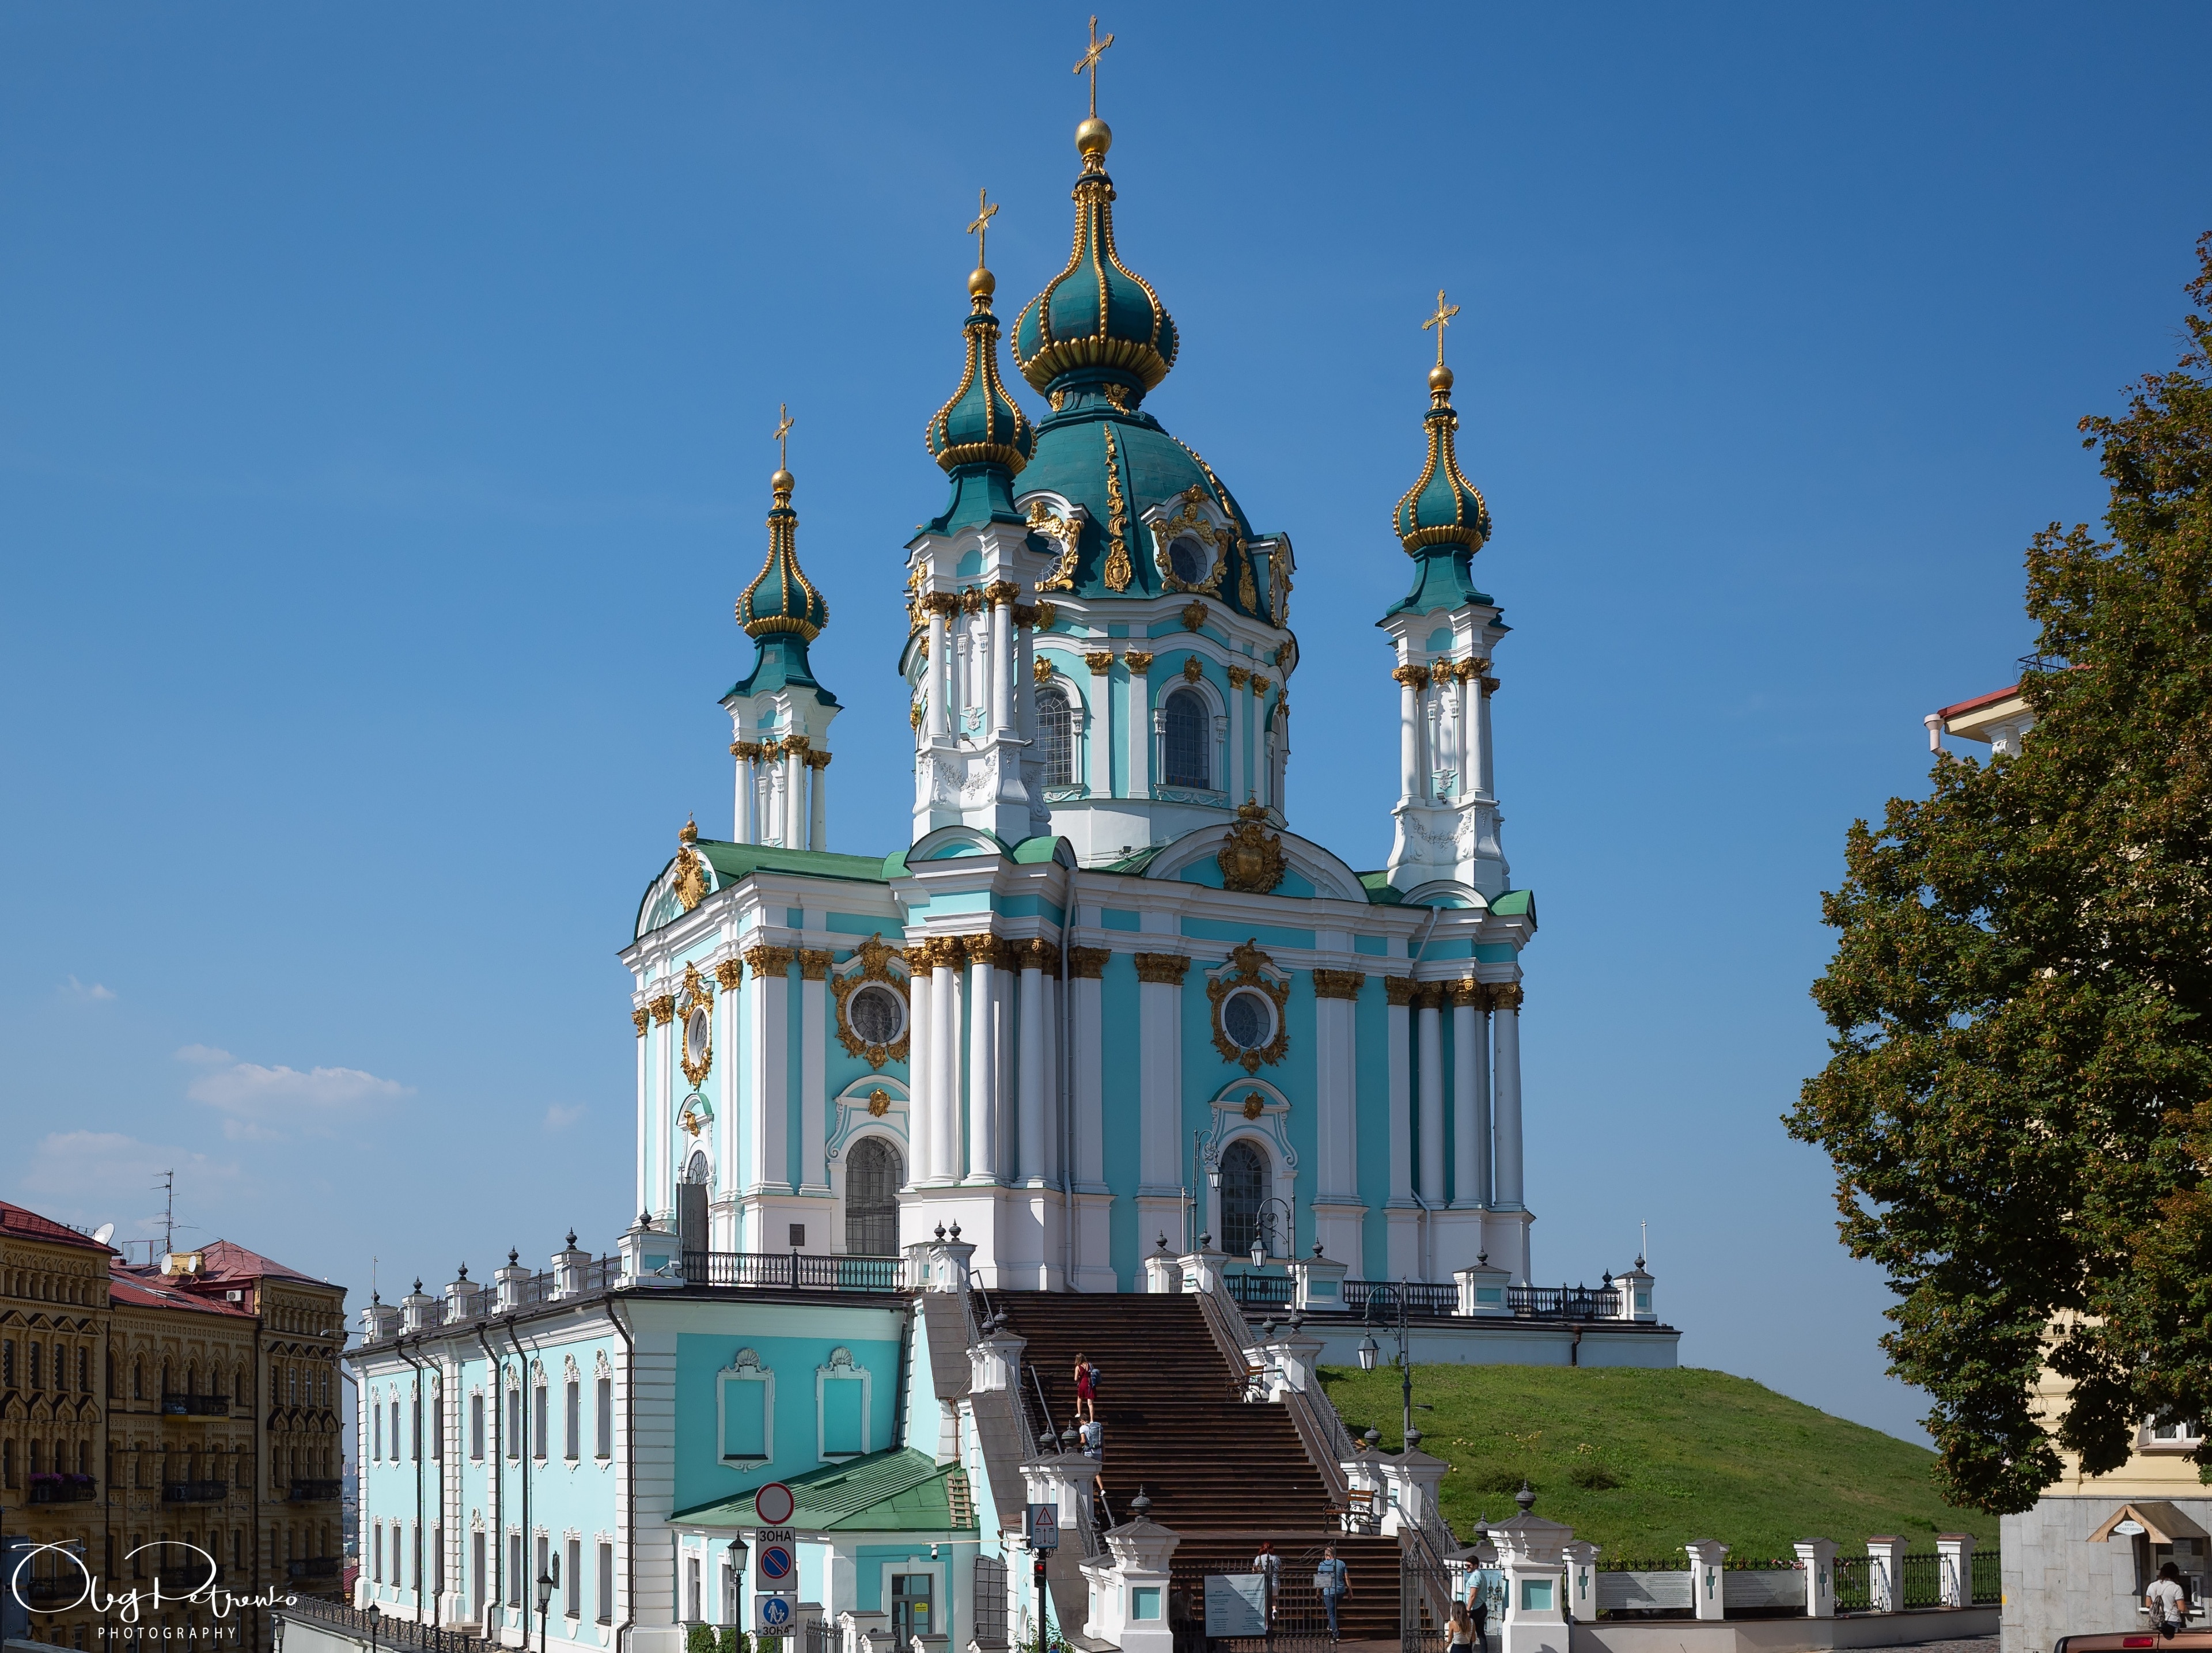 St. Andrew's Church in Kiev - an Orthodox church in honor of the Apostle Andrew the First-Called; It was built in the Baroque style by the architect Bartolomeo Rastrelli in 1754 on St. Andrew’s Mountain. It is located on the steep right bank of the Dnieper, above the historical part of the city - Podol.